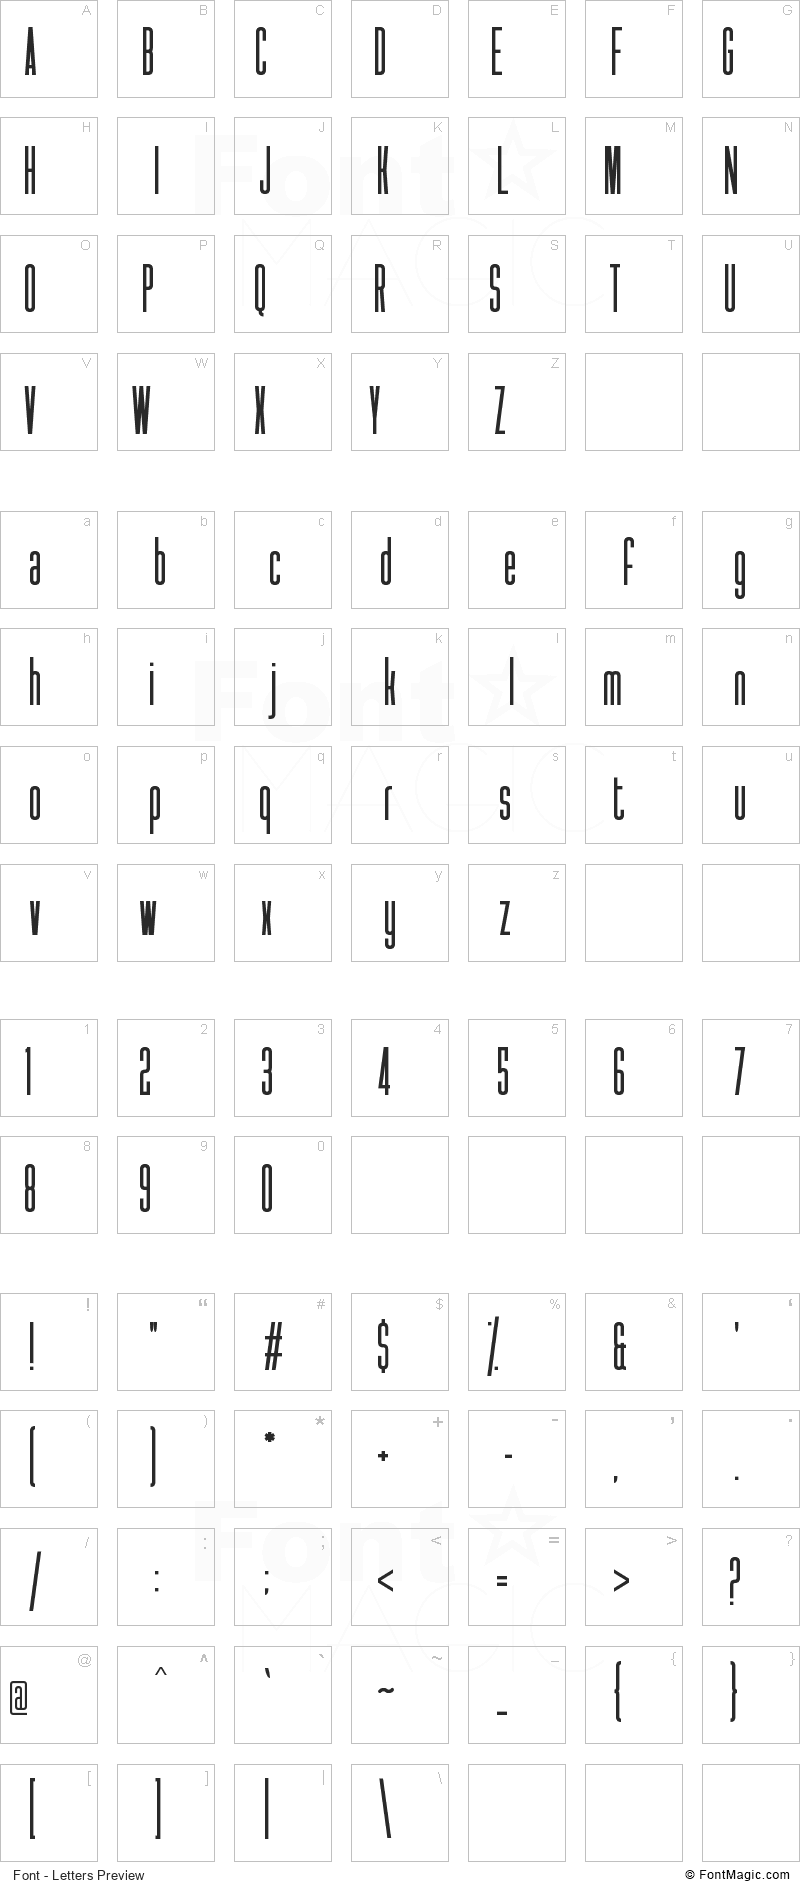 See You At The Movies 2 Font - All Latters Preview Chart